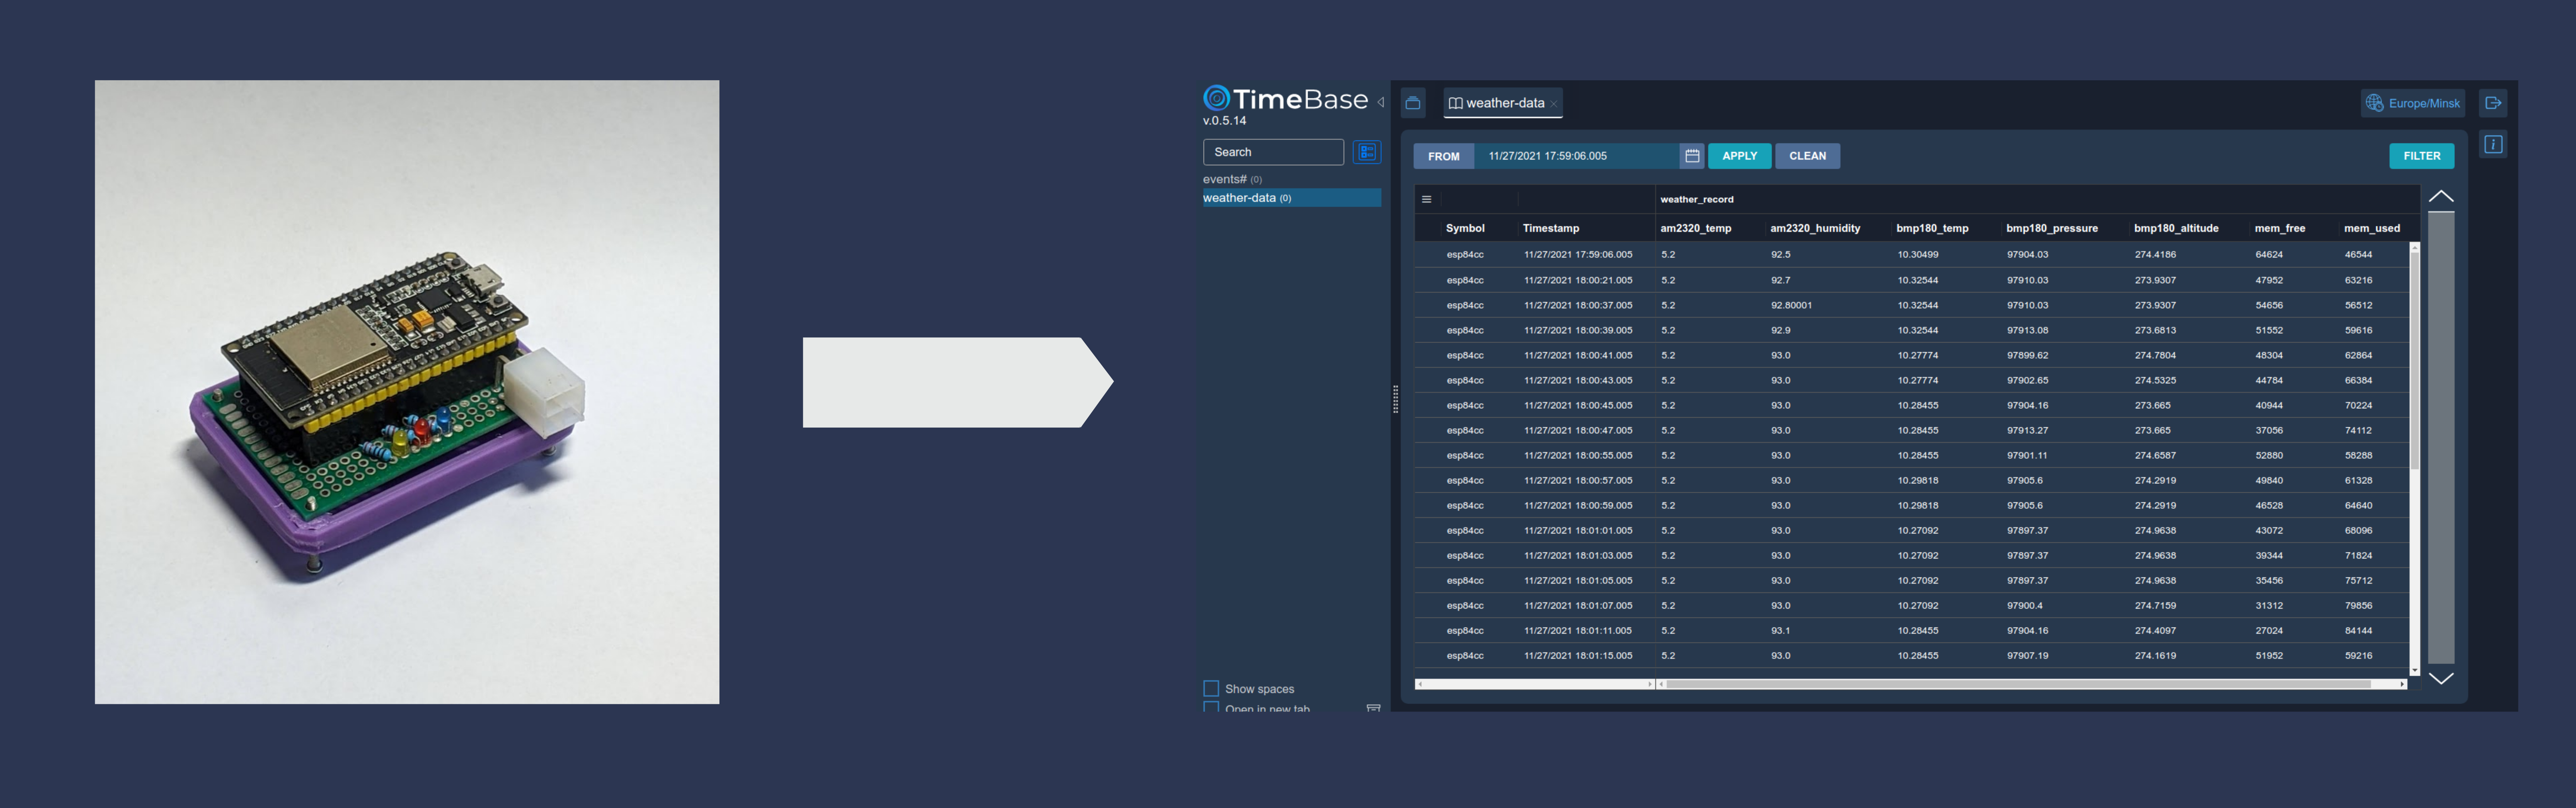 Duplicate of Using TimeBase as Data Storage For IoT Devices